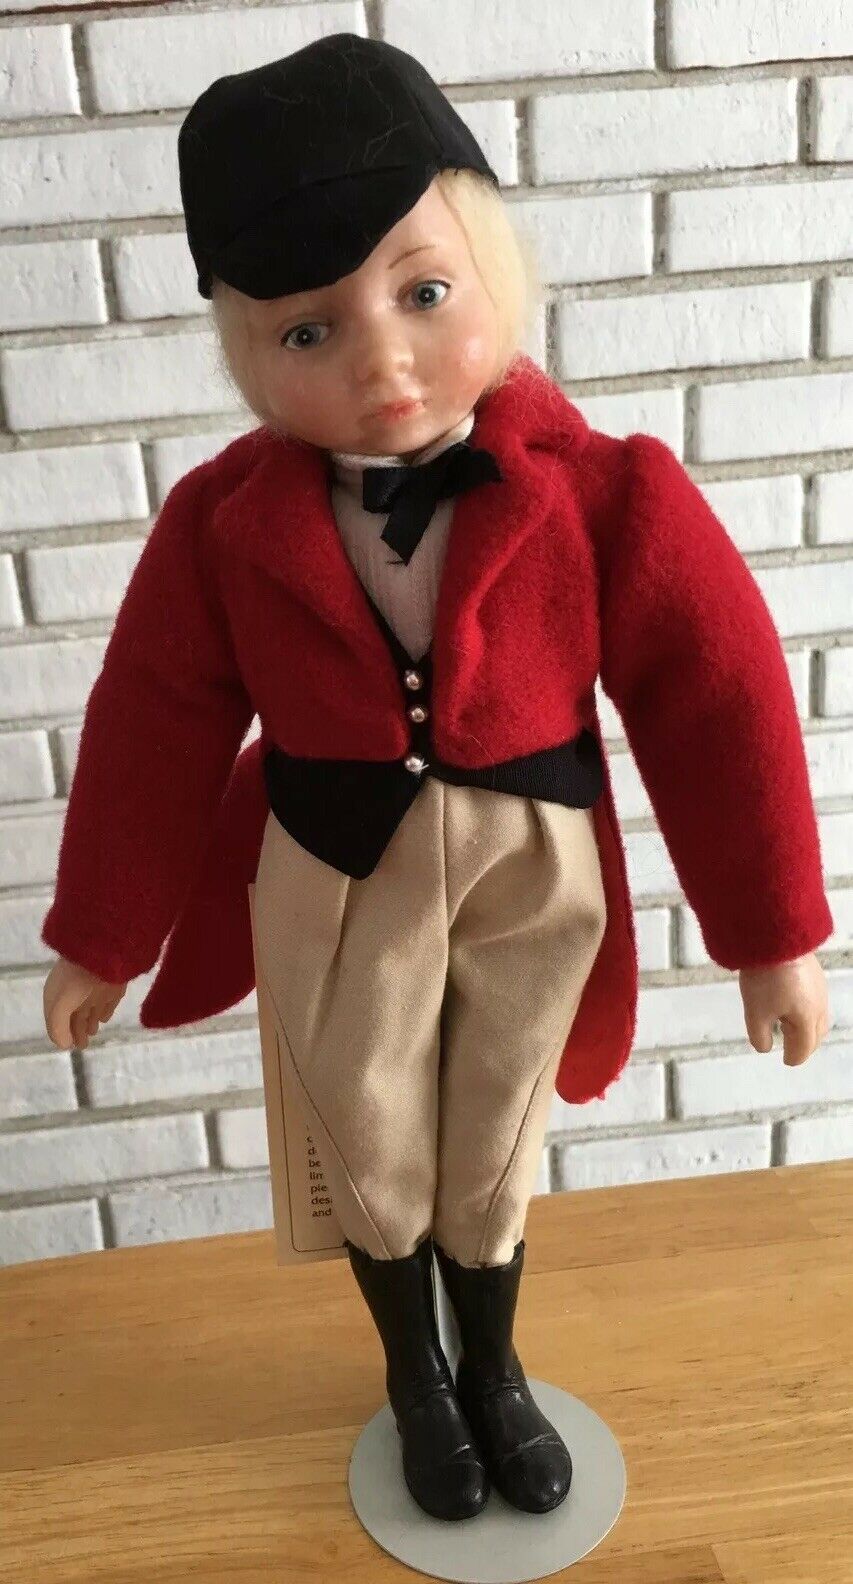 Horse Rider Boy Doll Cracow Poland Guy Luy Hubert Hand Made Limited #86